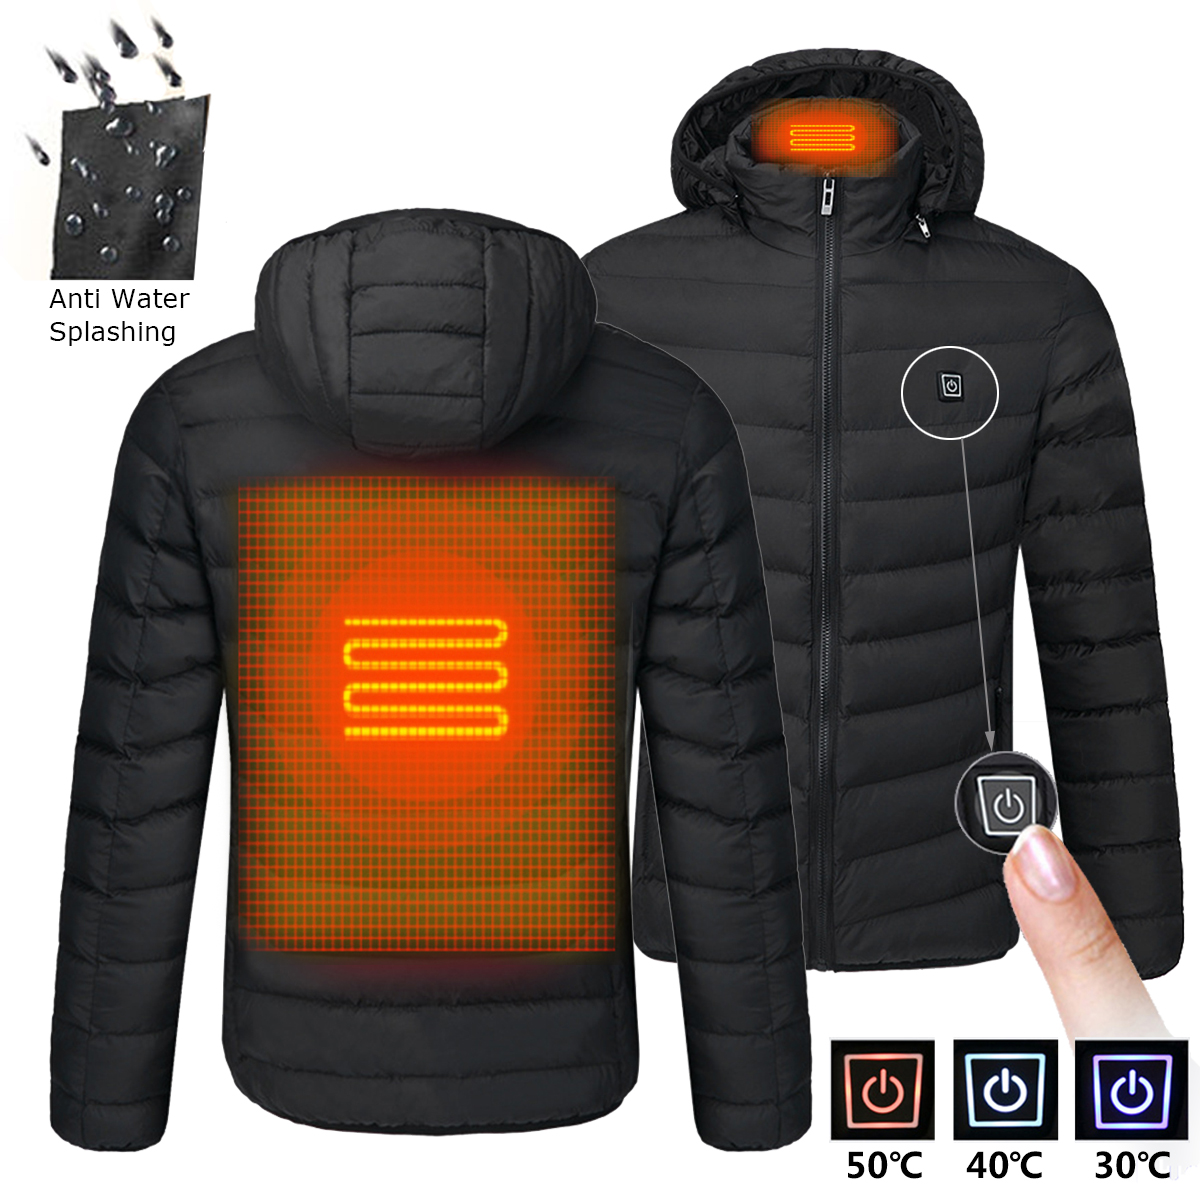 

Mens USB Heated Warm Back Cervical Spine Hooded Winter Jacket Motorcycle Skiing Riding Coat Women